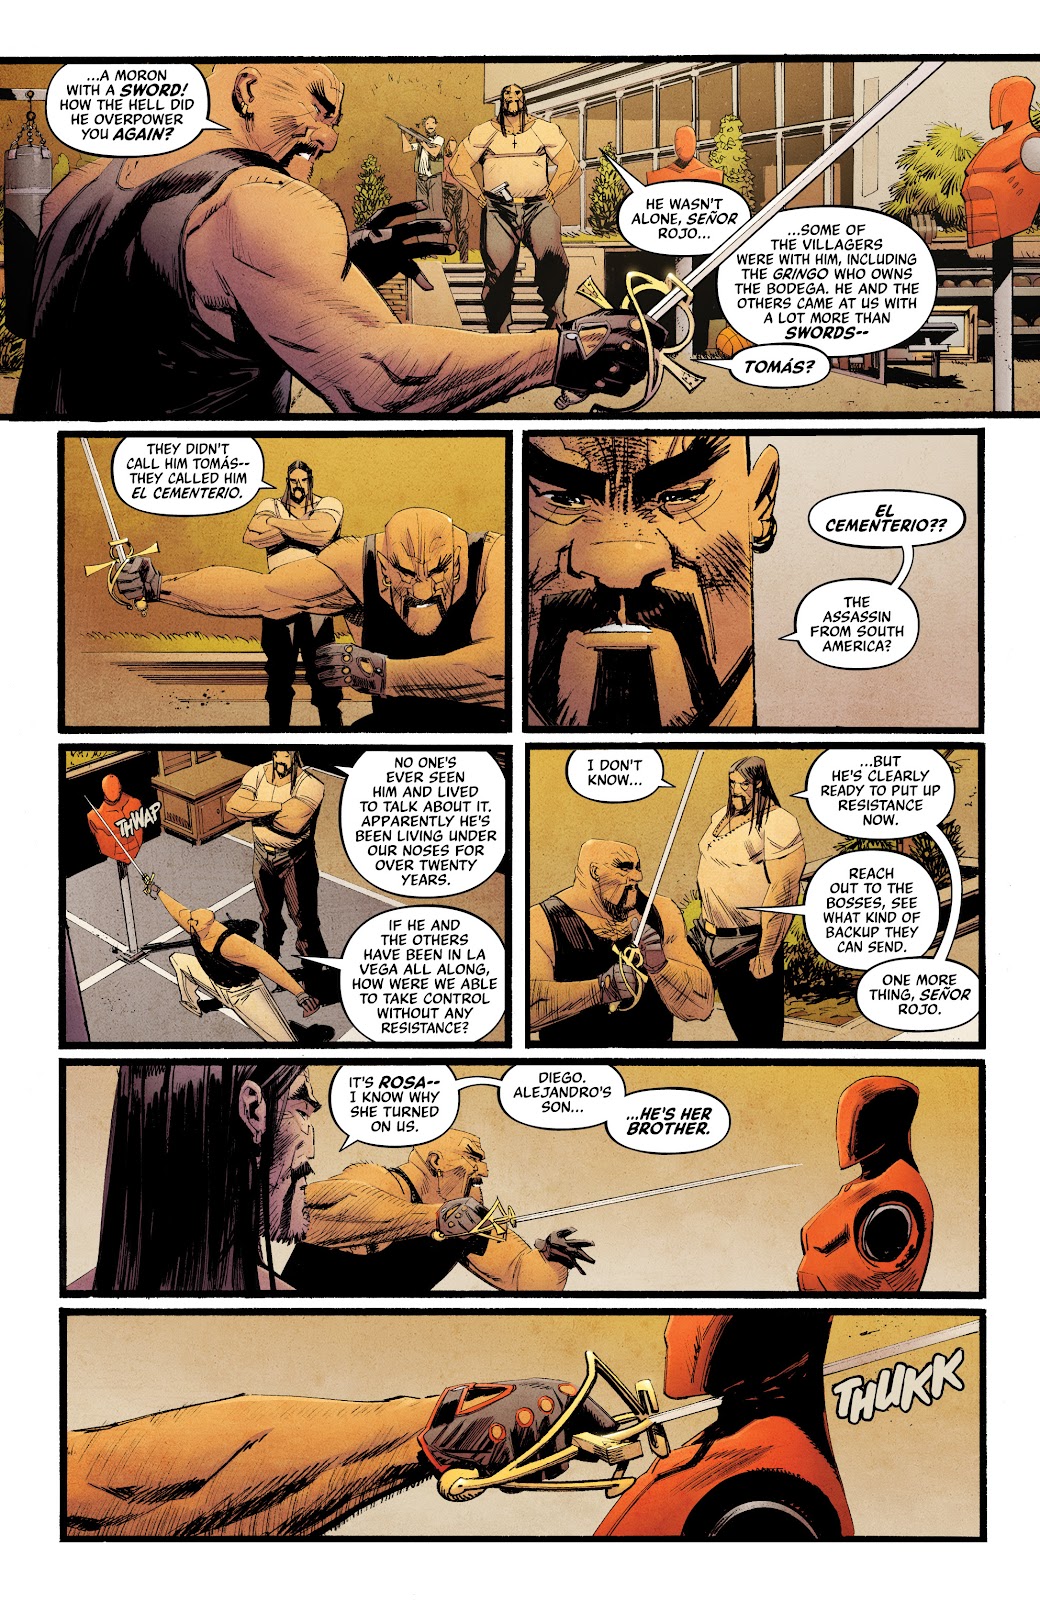 Zorro: Man of the Dead issue 3 - Page 5